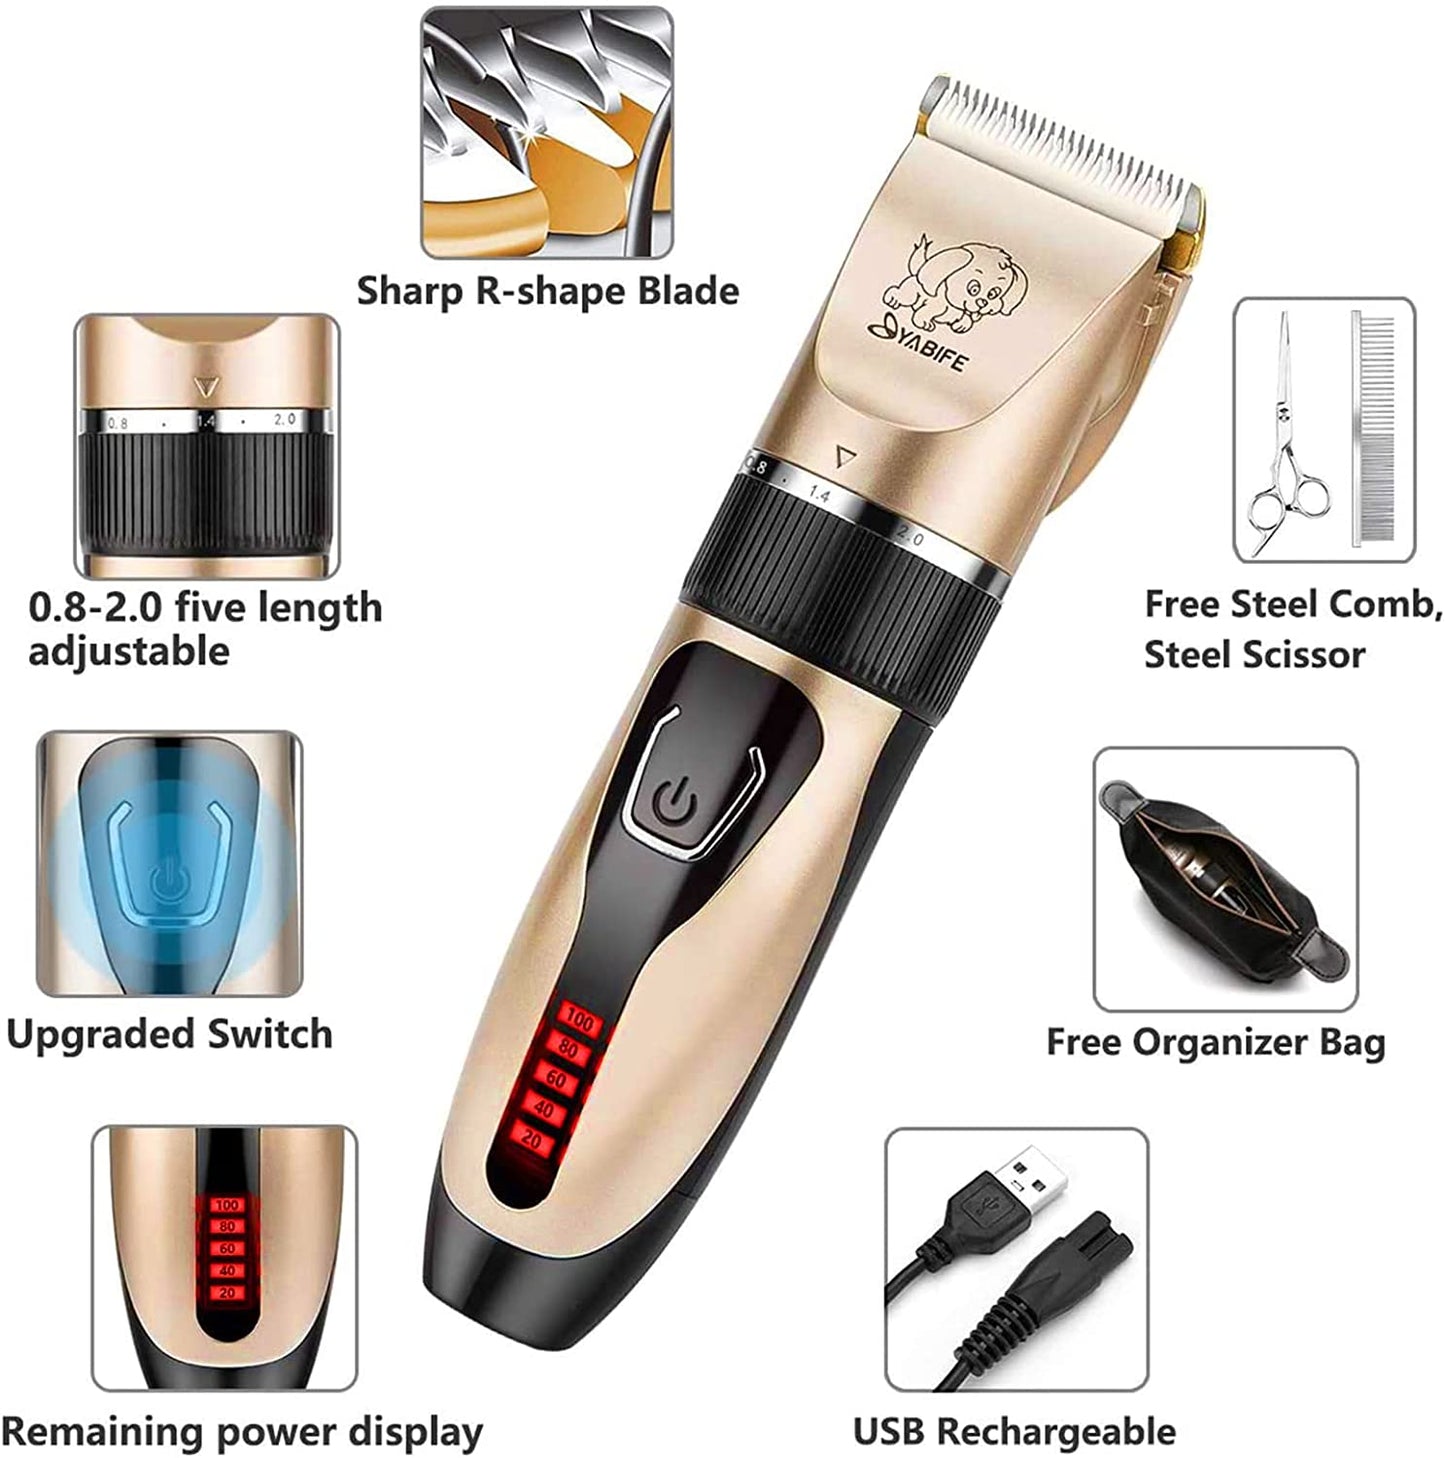 Dog Clippers, USB Rechargeable Cordless Dog Grooming Kit, Electric Pets Hair Trimmers Shaver Shears for Dogs and Cats, Quiet, Washable, with LED Display